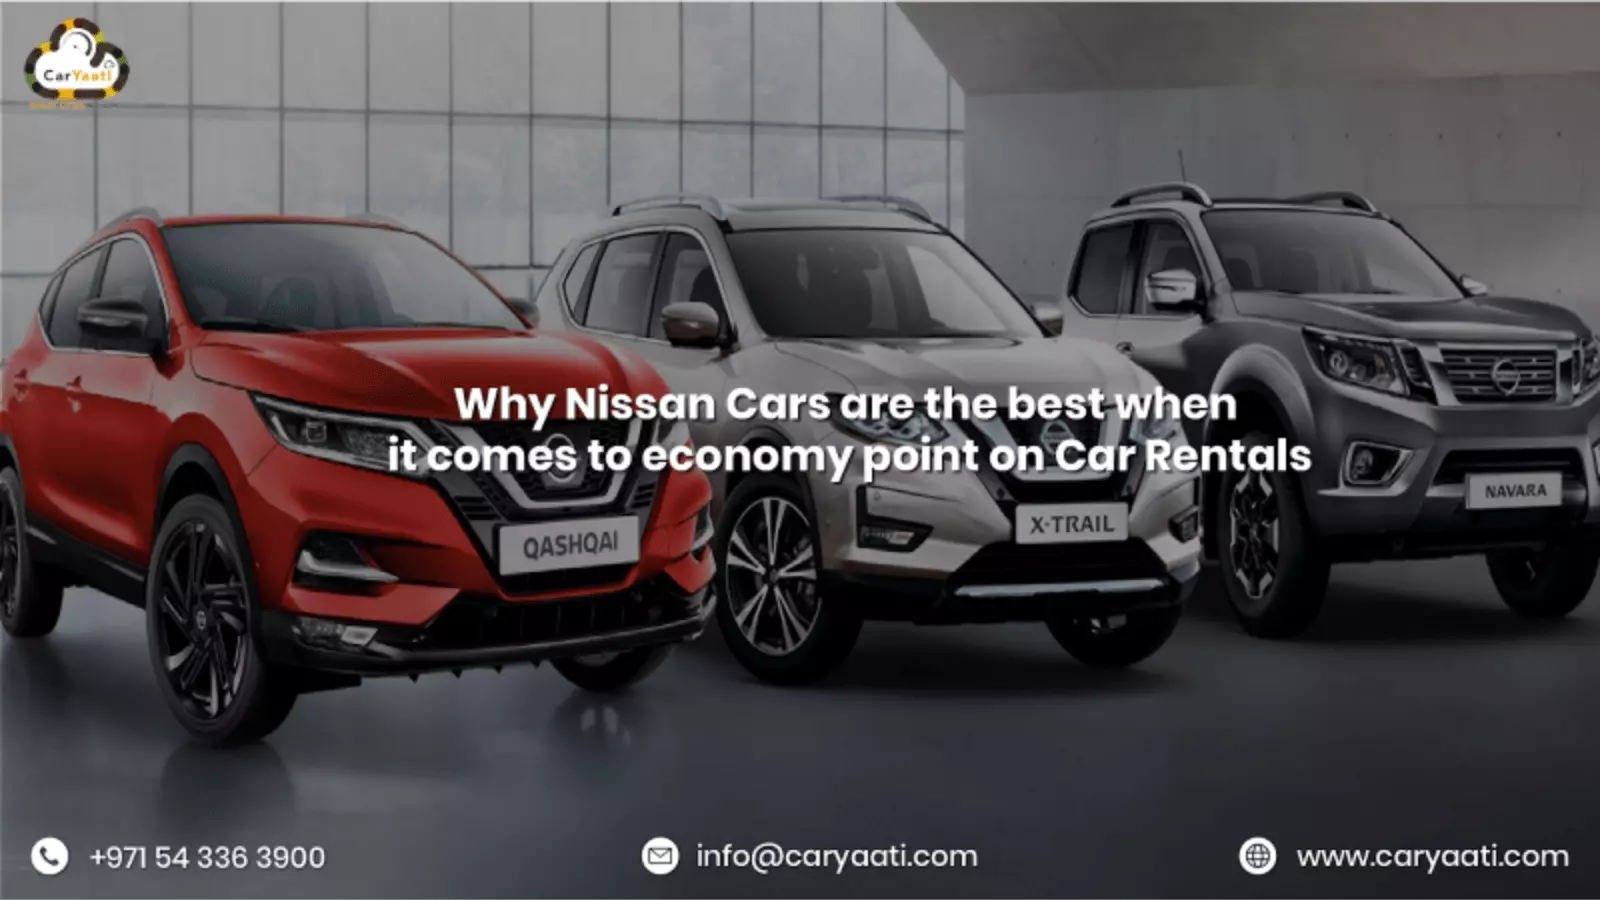 Why Nissan Cars are the Best When It Comes to Economy Point on Car Rentals